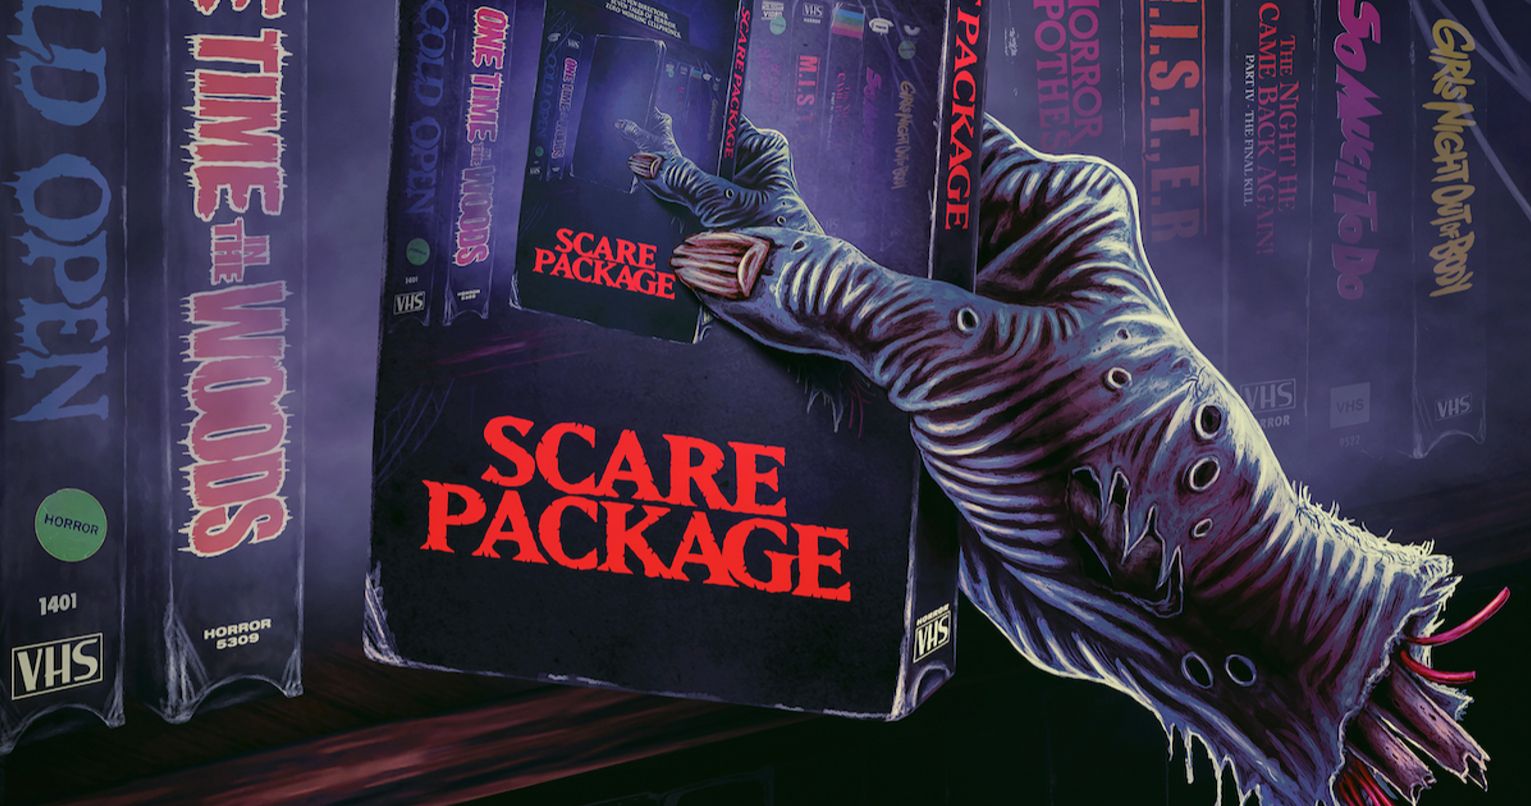 Scare Package Trailer Arrives Bringing 7 Hilarious Tales of Terror with It